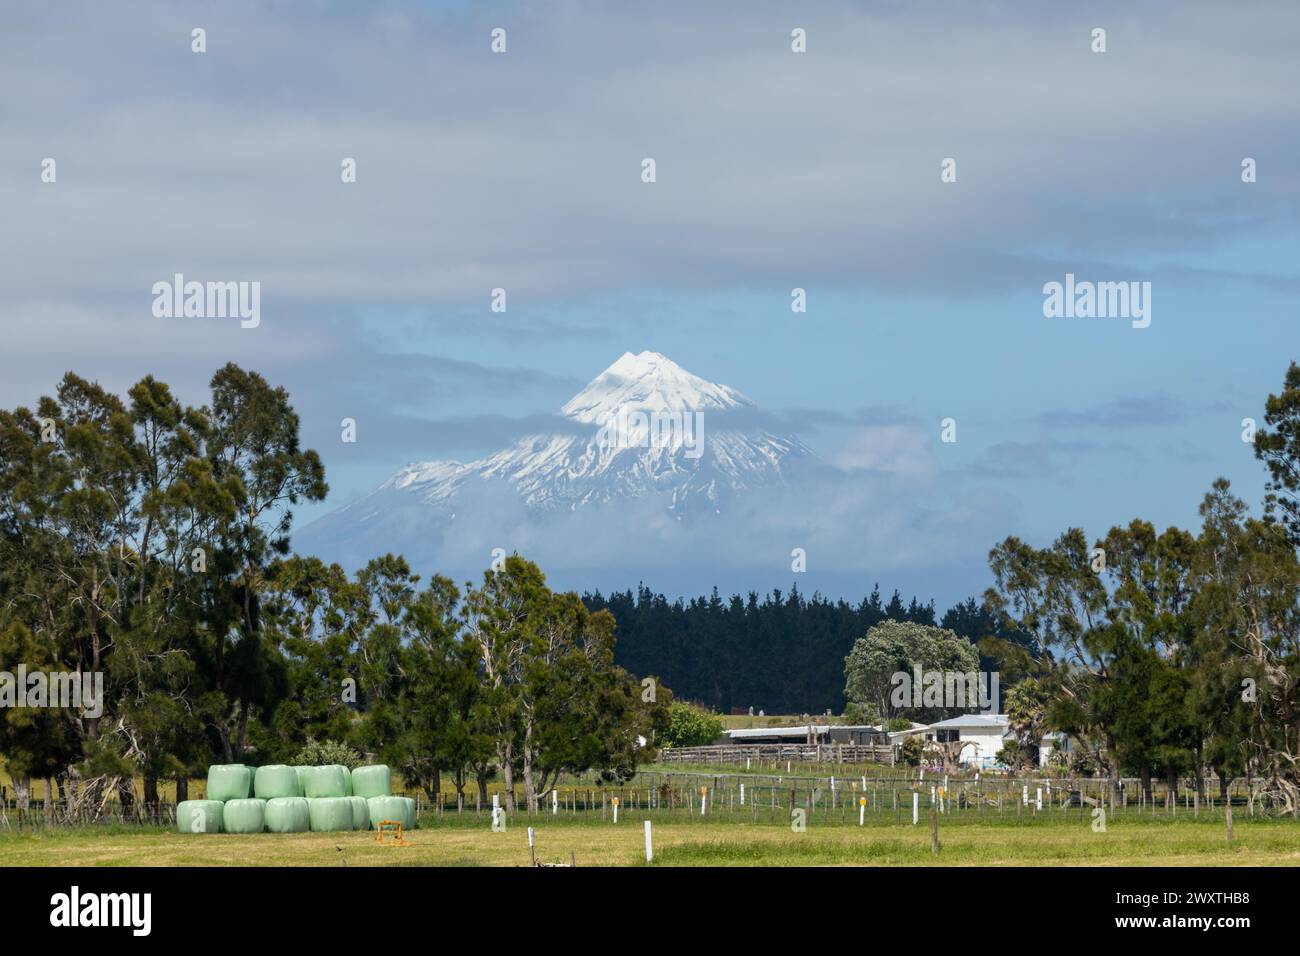 Snow covers  Mount Taranaki, also called Mt Egmont, a dormant stratovolcano on the west coast of New Zealand's North Island. At 2,518 metres, it is th Stock Photo